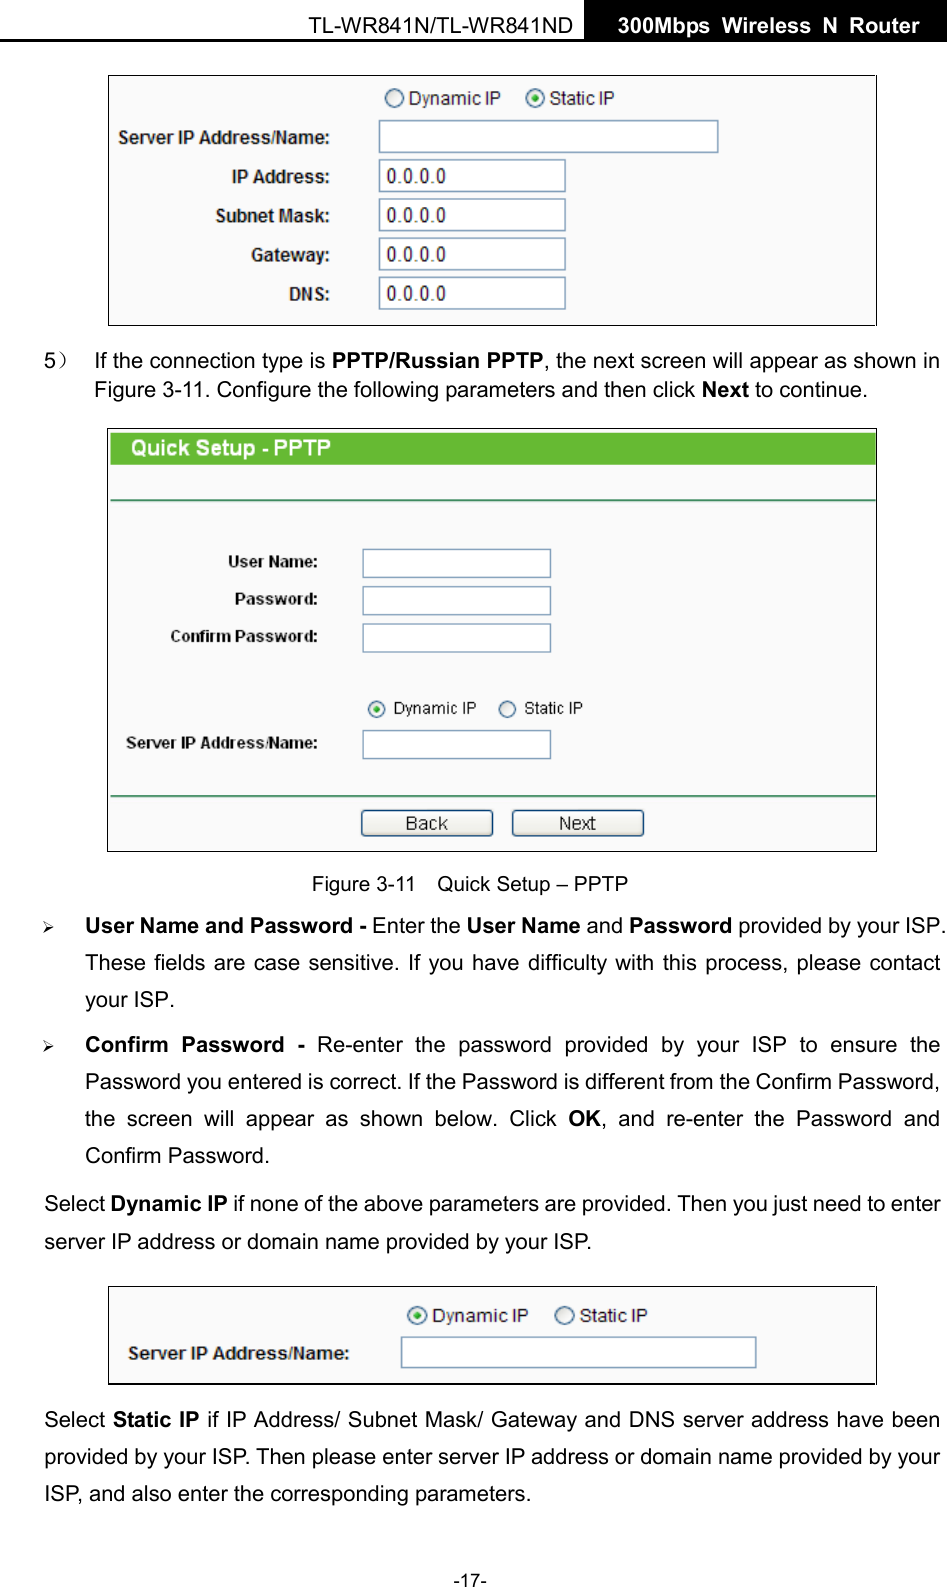  TL-WR841N/TL-WR841ND  300Mbps Wireless N  Router     5） If the connection type is PPTP/Russian PPTP, the next screen will appear as shown in Figure 3-11. Configure the following parameters and then click Next to continue.  Figure 3-11  Quick Setup – PPTP  User Name and Password - Enter the User Name and Password provided by your ISP. These fields are case sensitive. If you have difficulty with this process, please contact your ISP.  Confirm Password -  Re-enter the password provided by your ISP to ensure the Password you entered is correct. If the Password is different from the Confirm Password, the screen will appear as shown below. Click OK, and re-enter the Password and Confirm Password. Select Dynamic IP if none of the above parameters are provided. Then you just need to enter server IP address or domain name provided by your ISP.    Select Static IP if IP Address/ Subnet Mask/ Gateway and DNS server address have been provided by your ISP. Then please enter server IP address or domain name provided by your ISP, and also enter the corresponding parameters. -17- 